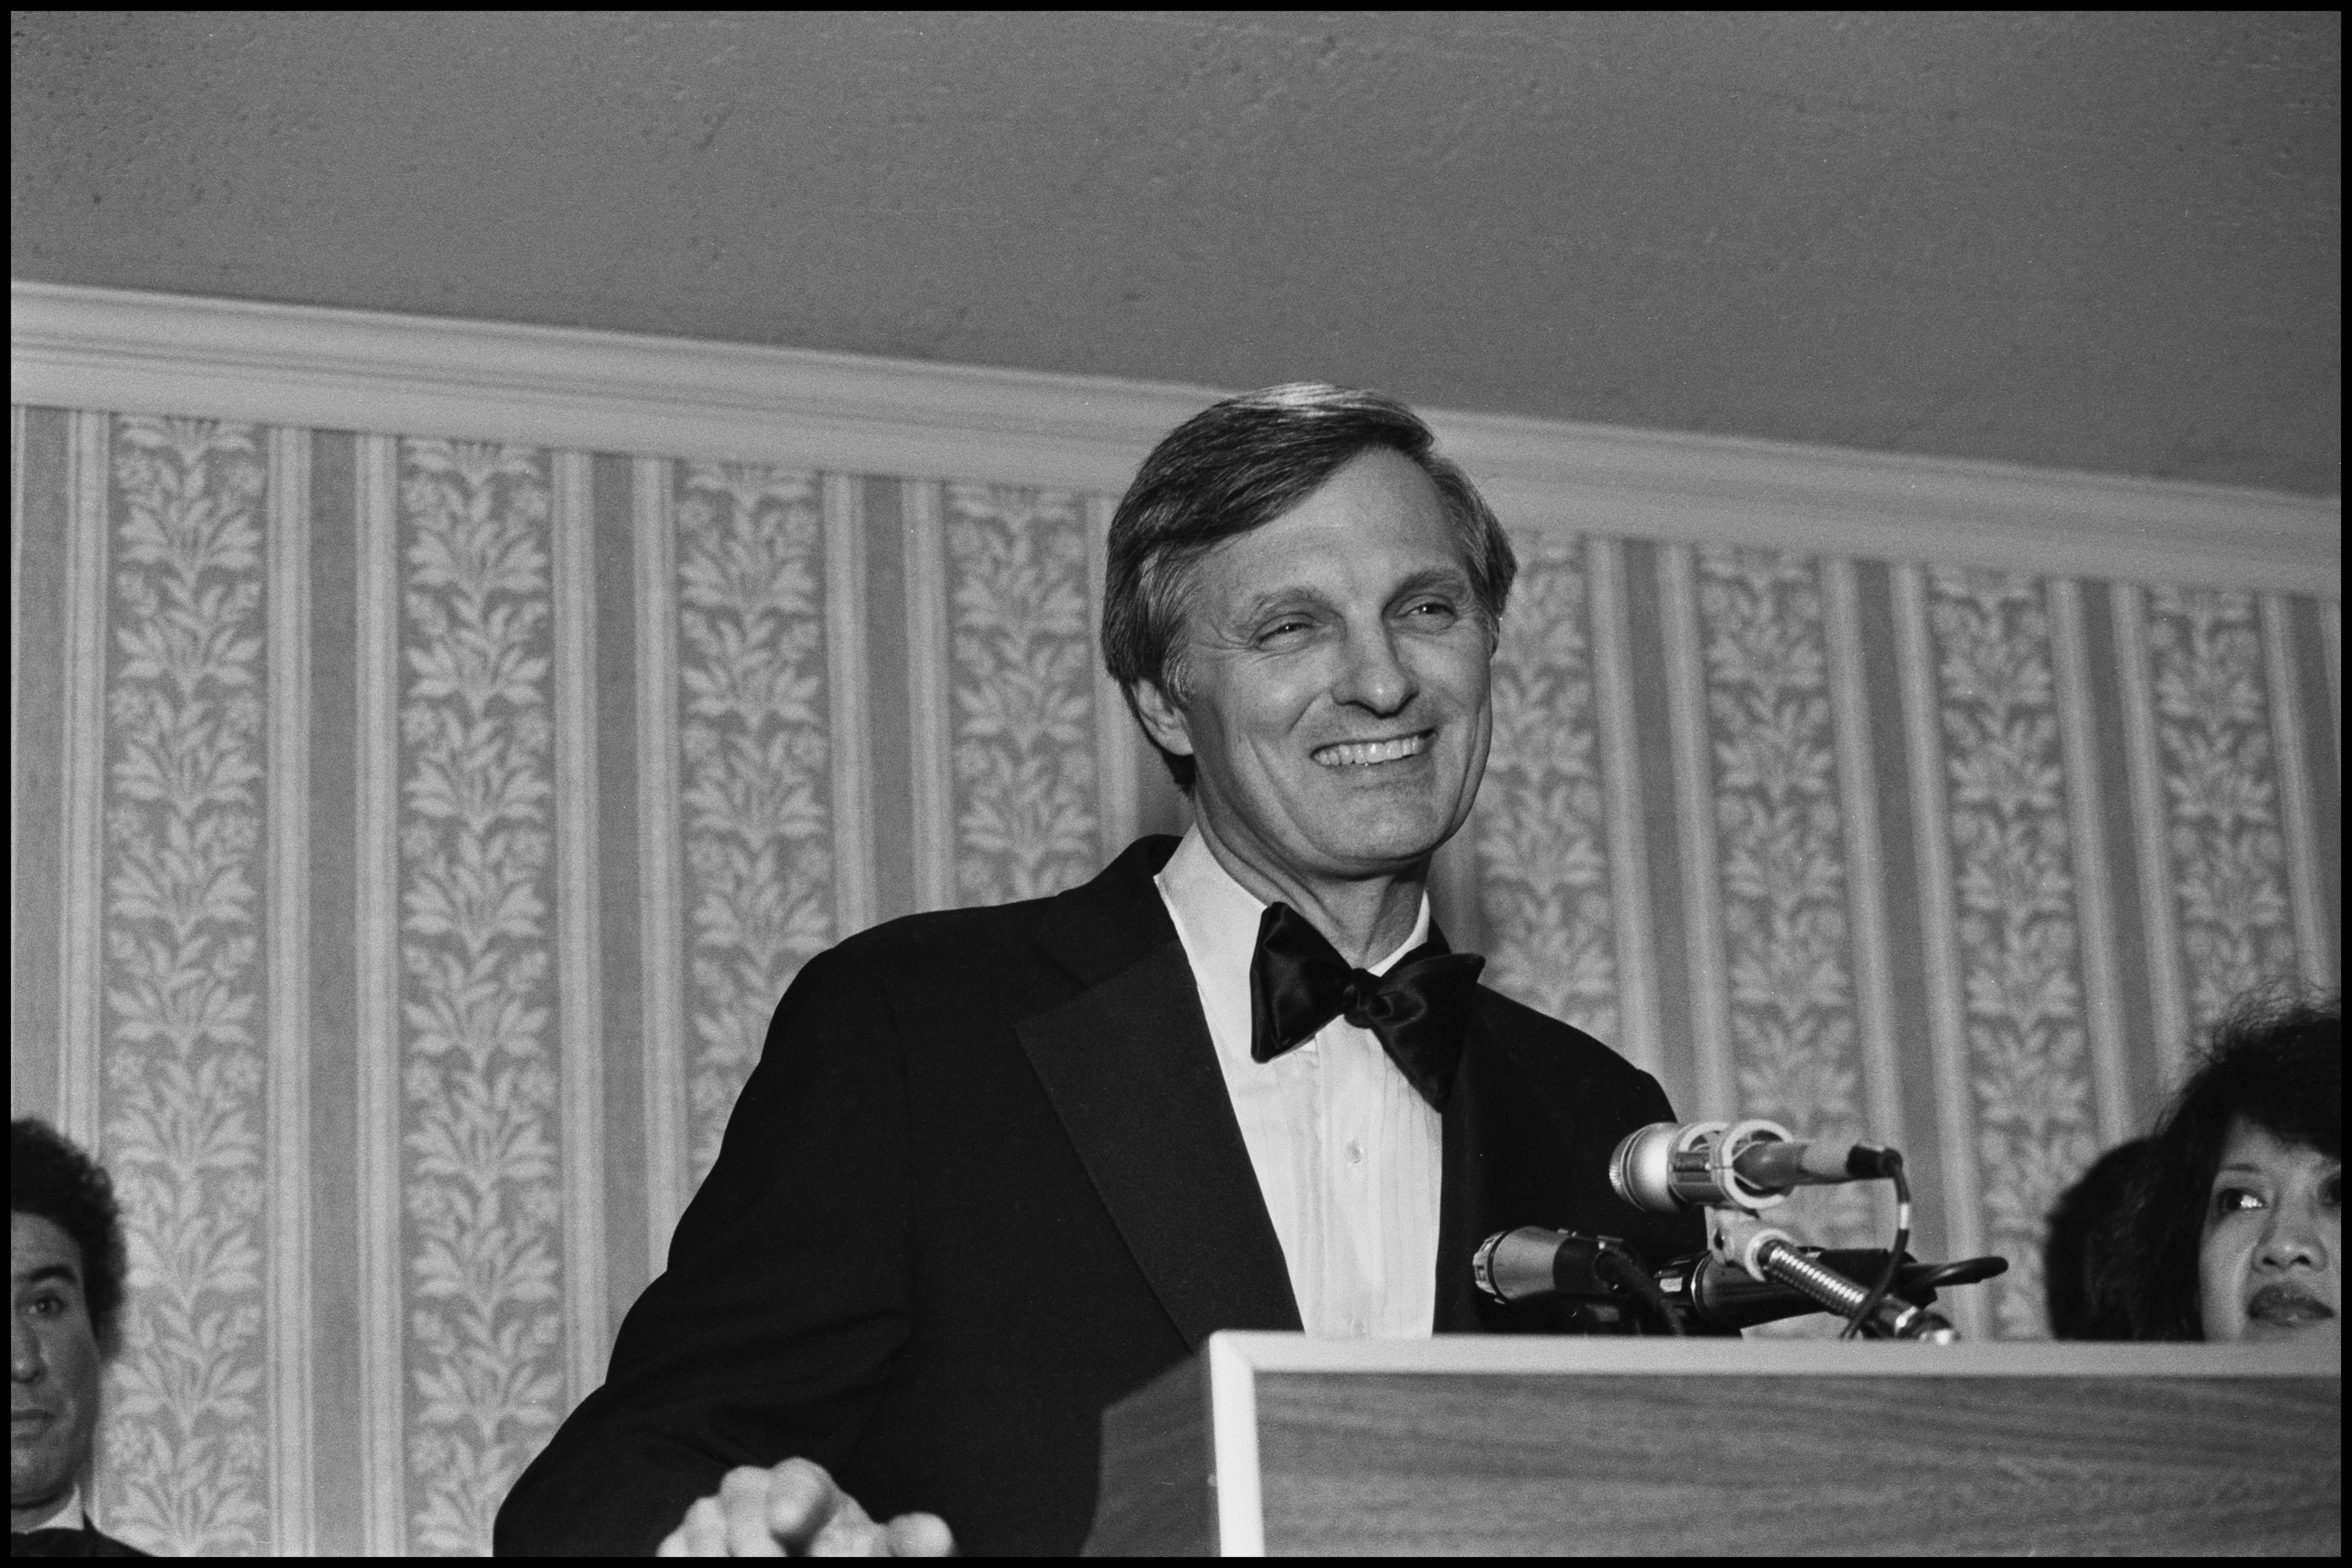 Alan Alda speaks during a National Women's Political Caucus event at the L'Enfant Plaza Hotel, Washington DC, October 23, 1985 | Source: Getty Images